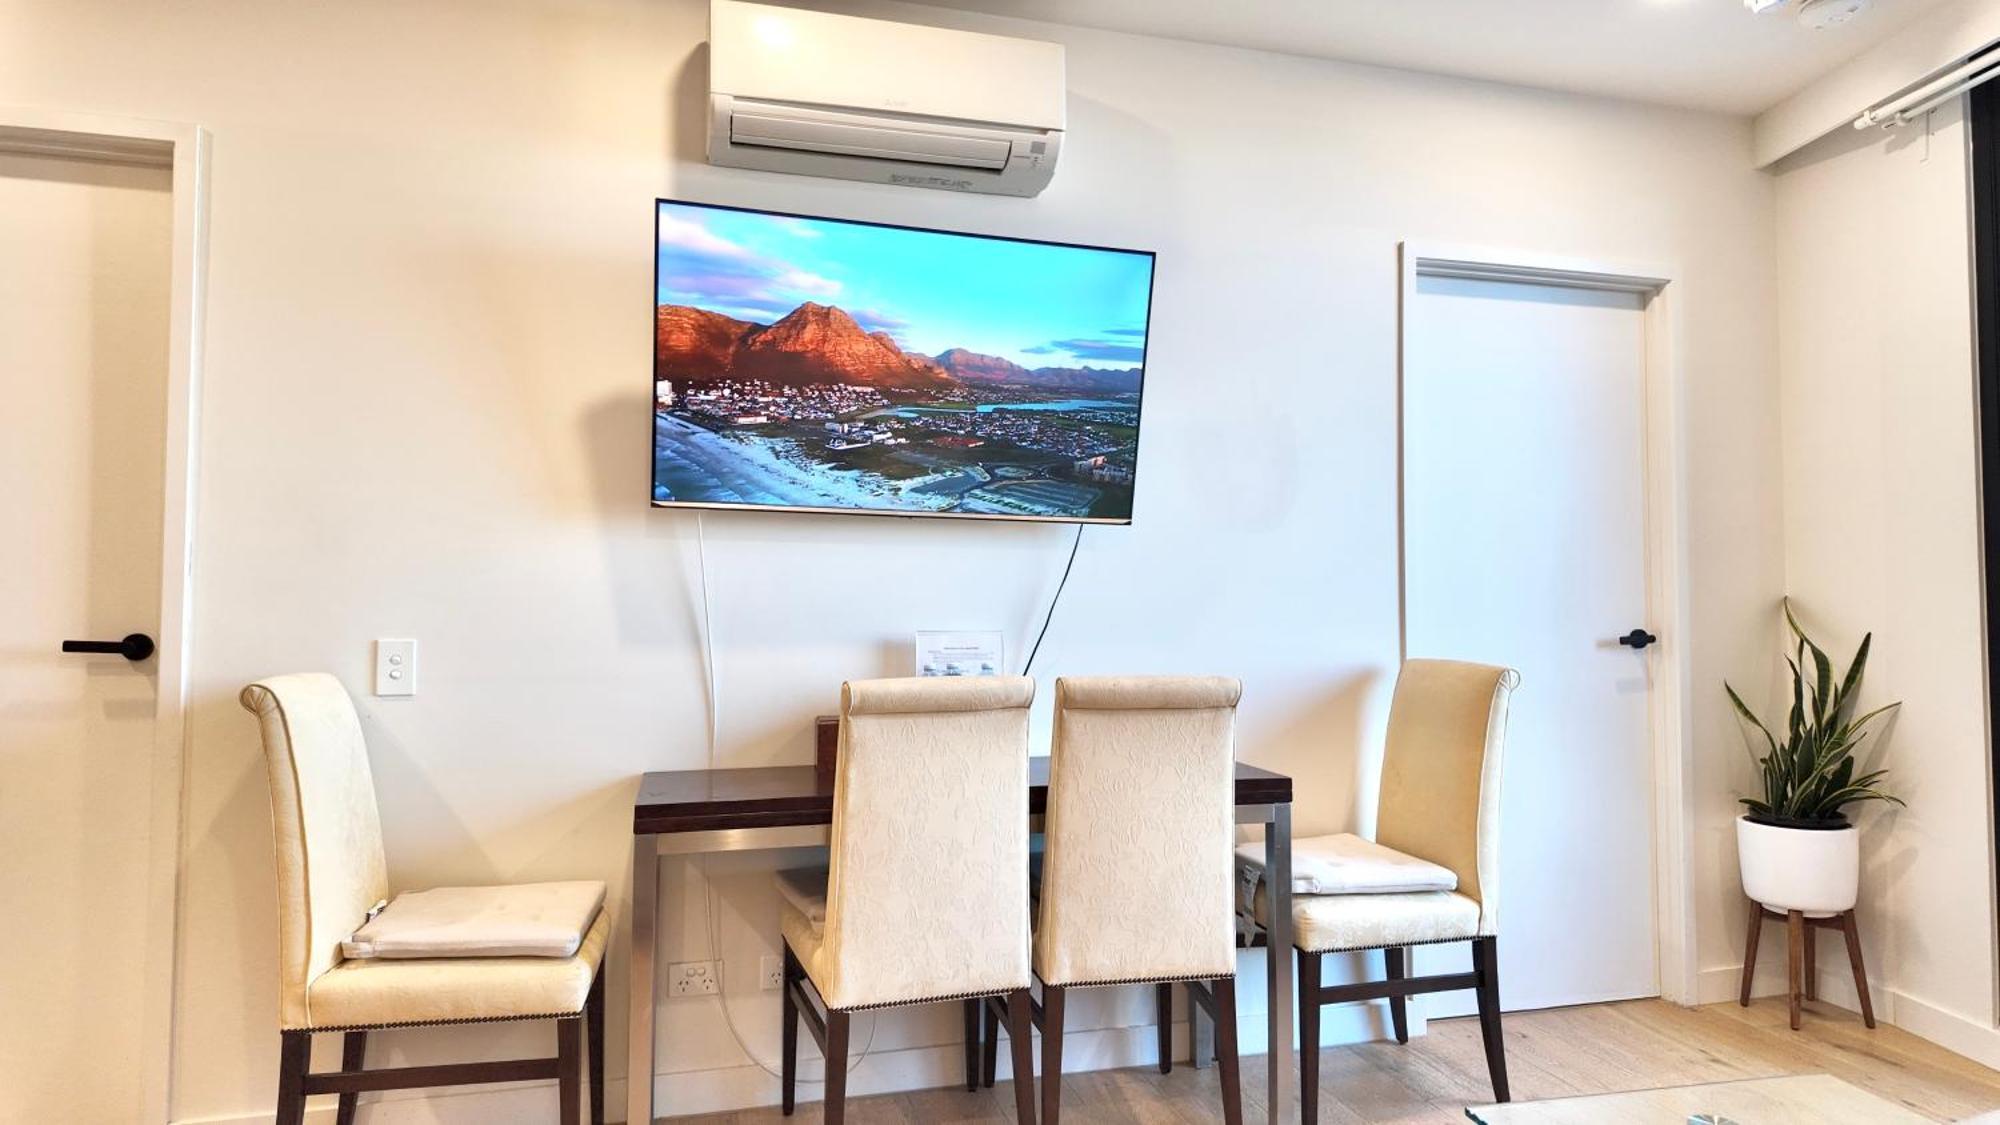 M-City Apartment - Executive Twin King Ensuites - Fully Equipped - Free Parking, Fast Wifi, Smart Tv, Netflix, Complementary Drinks & Amenities - M-City Shopping Centre Clayton 3168 Εξωτερικό φωτογραφία